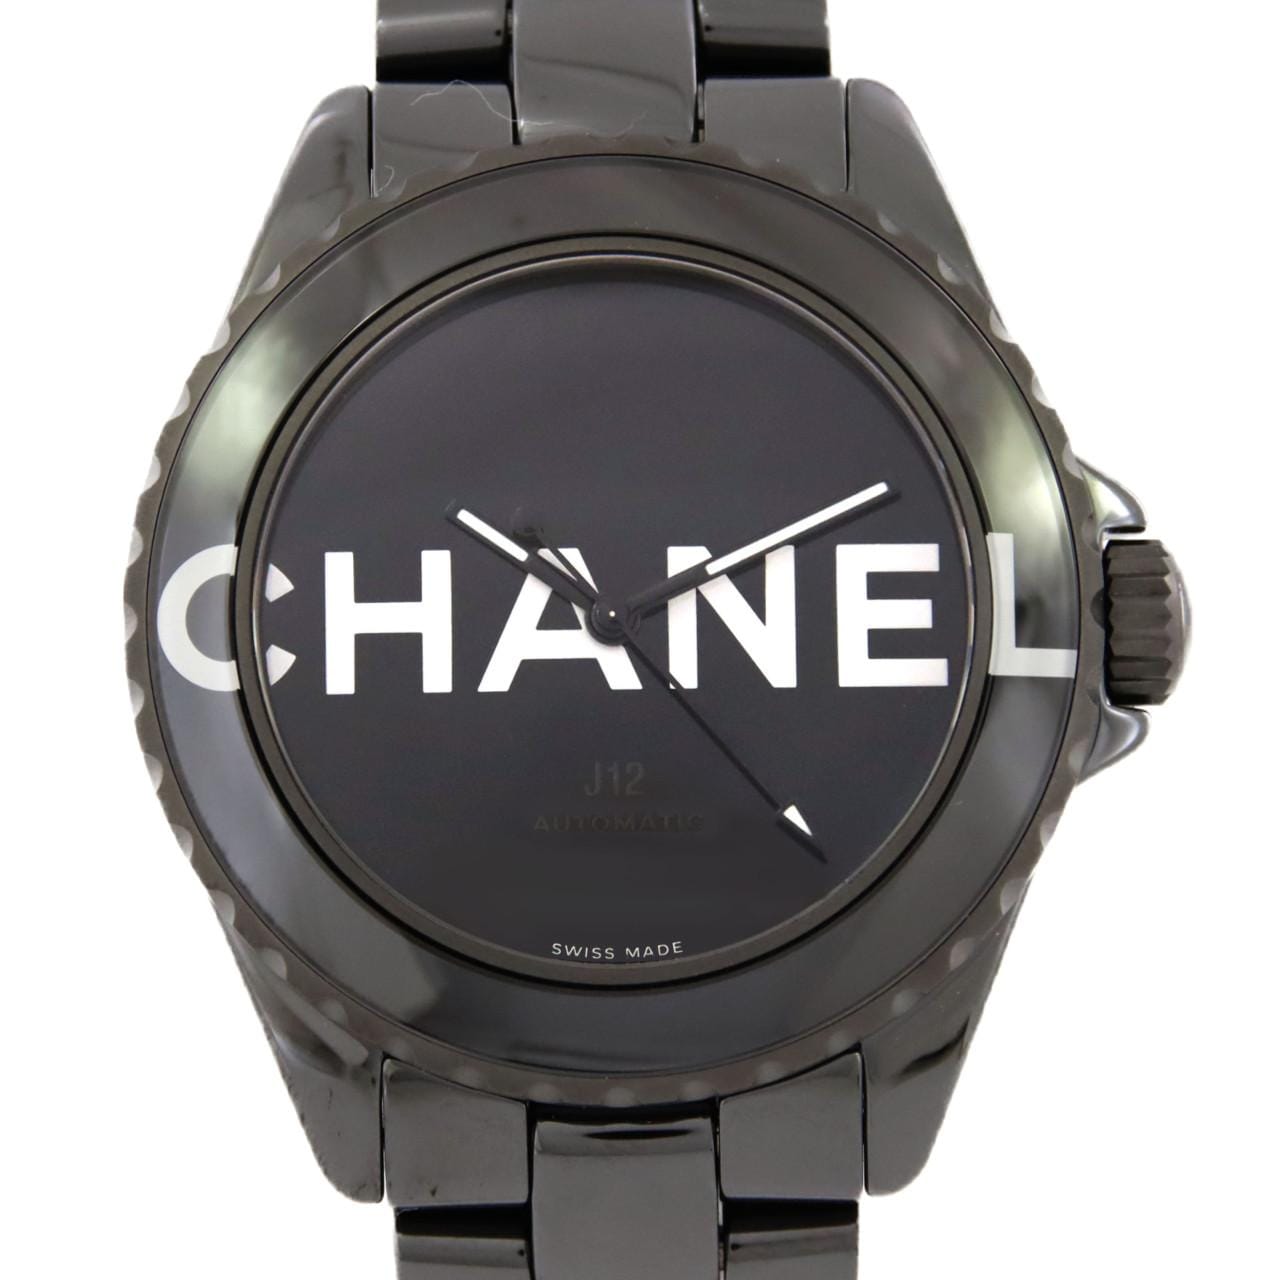 CHANEL J12 Wanted Du CHANEL 38mm Ceramic LIMITED H7418 陶瓷自動上弦